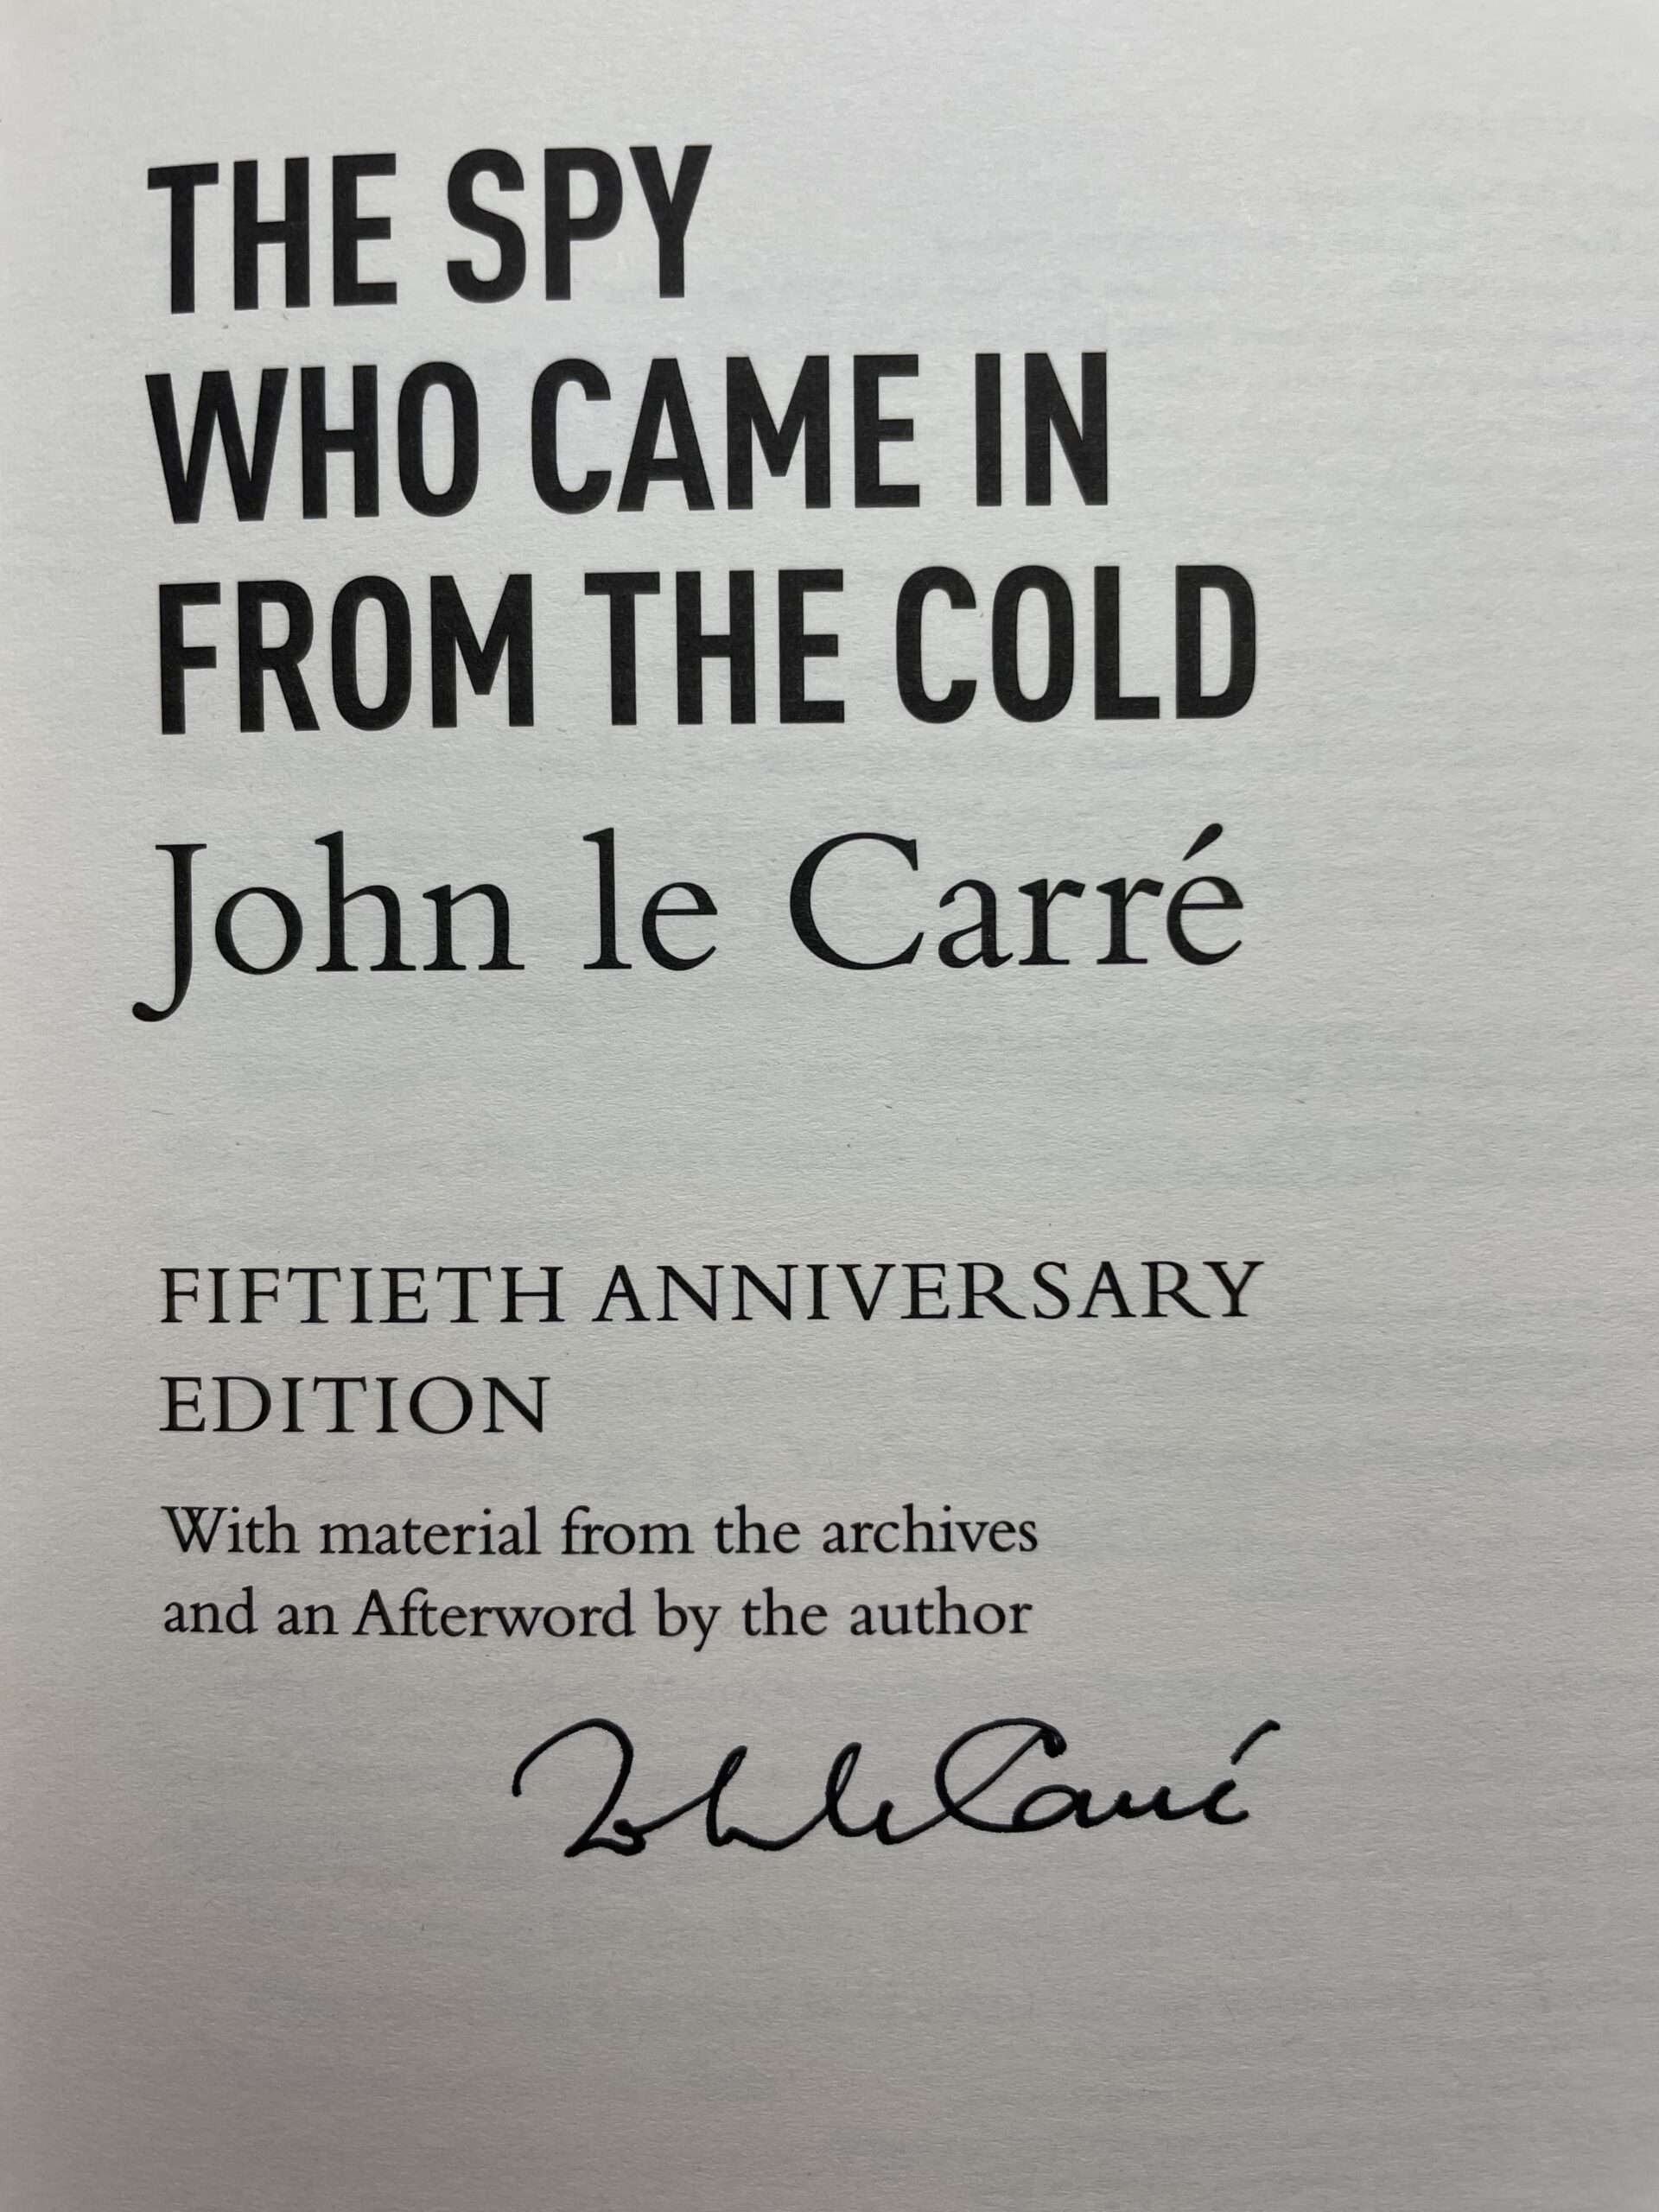 john le carre tswciftc signed anniversary edition2